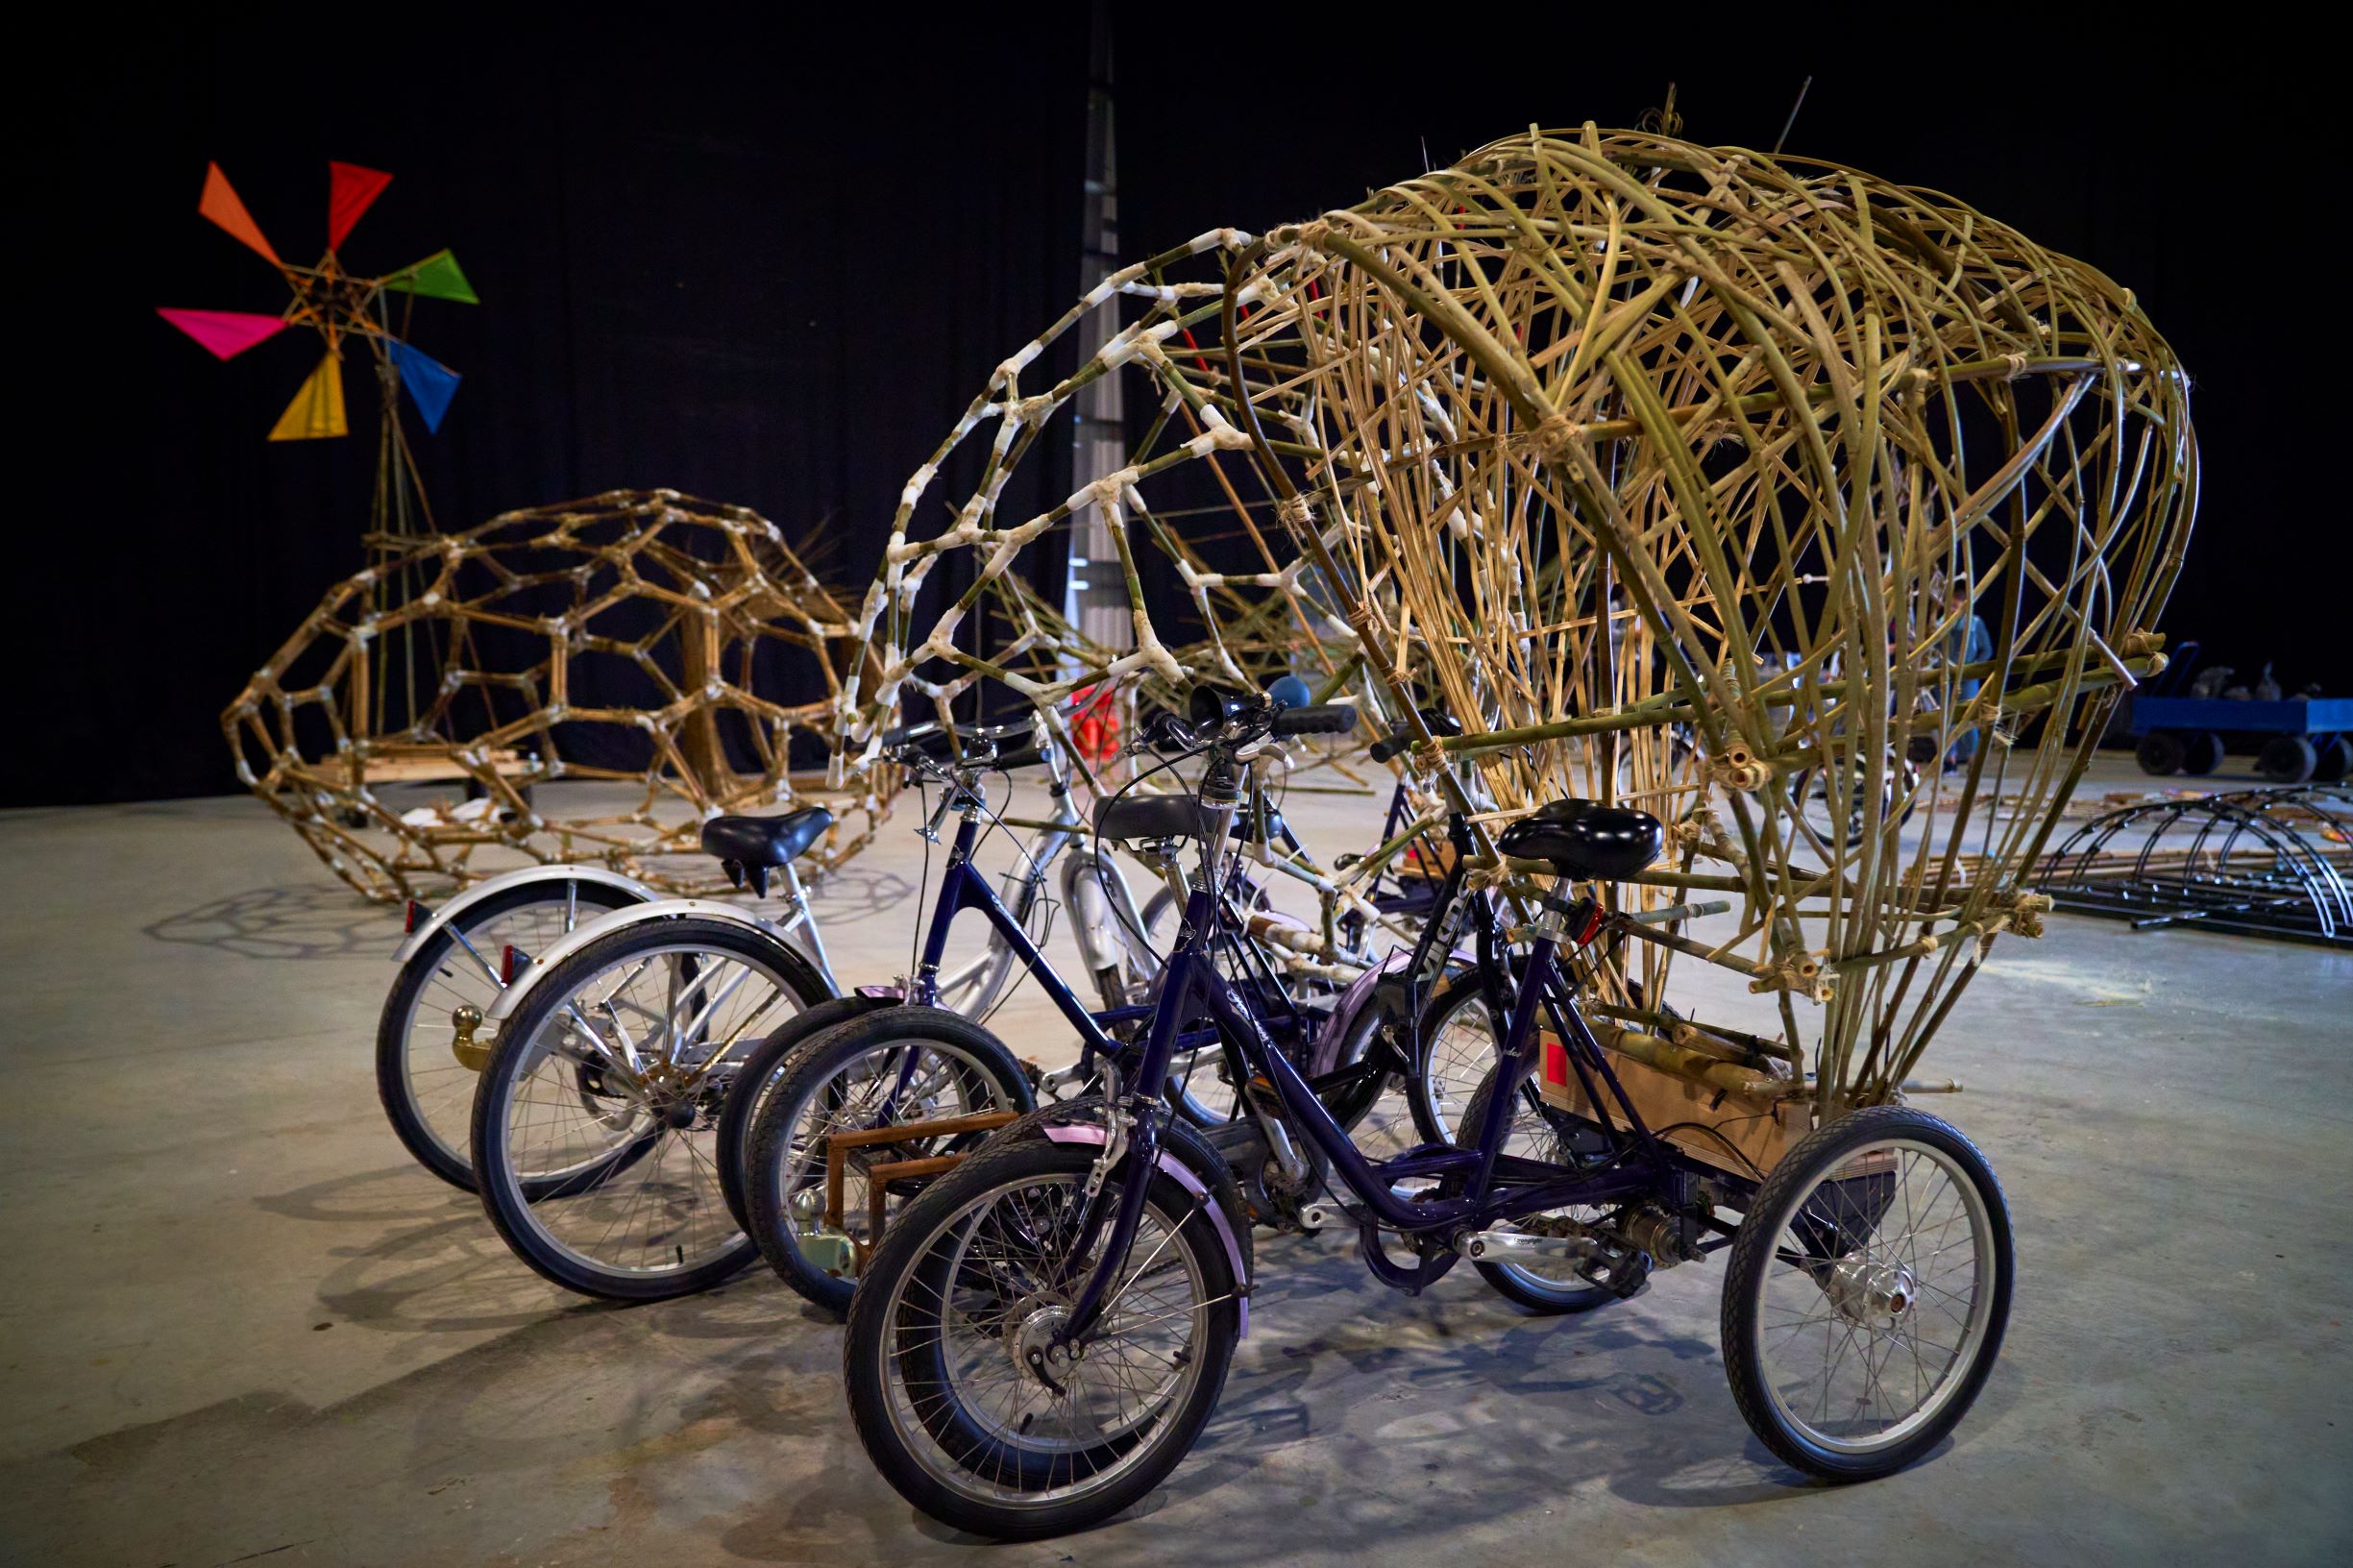 Trikes with bamboo art attached creating a shell or a frame of bamboo on the back of the 3-wheeled bike.